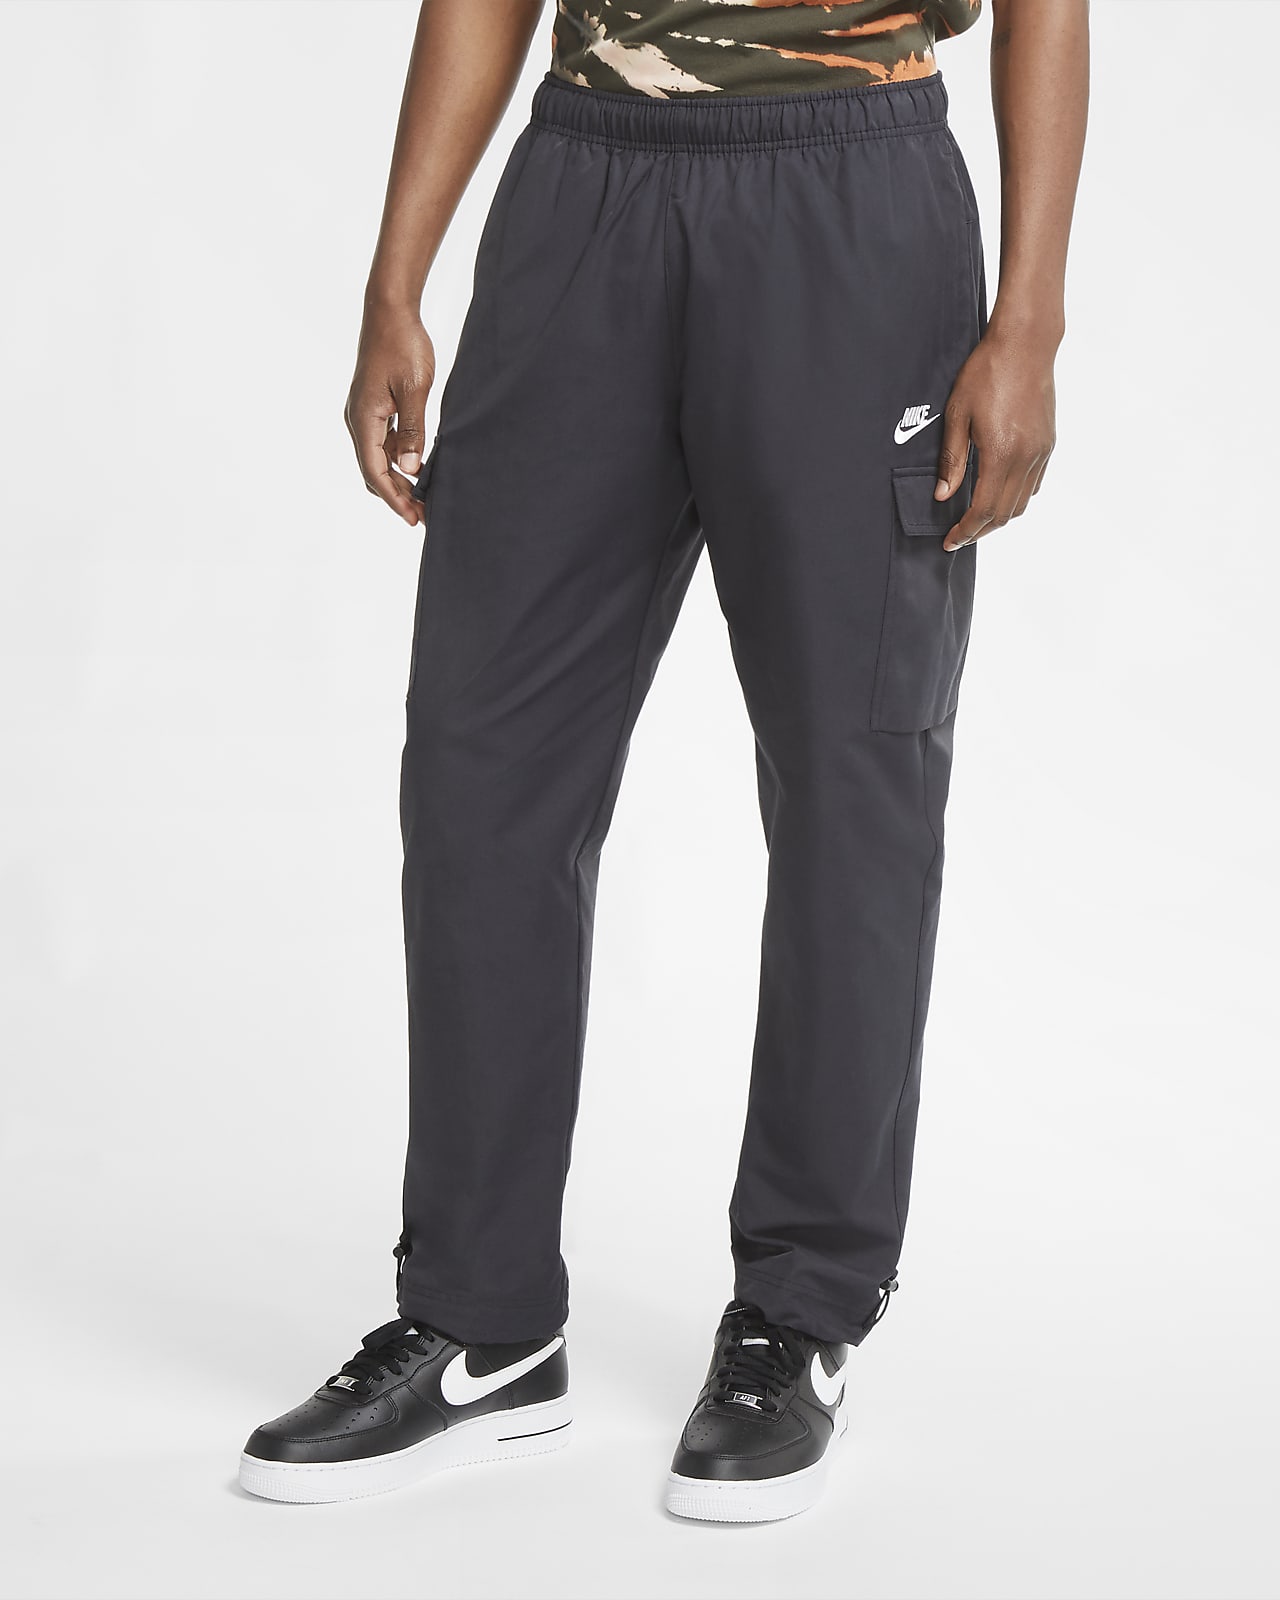 Woven Trousers. Nike SG